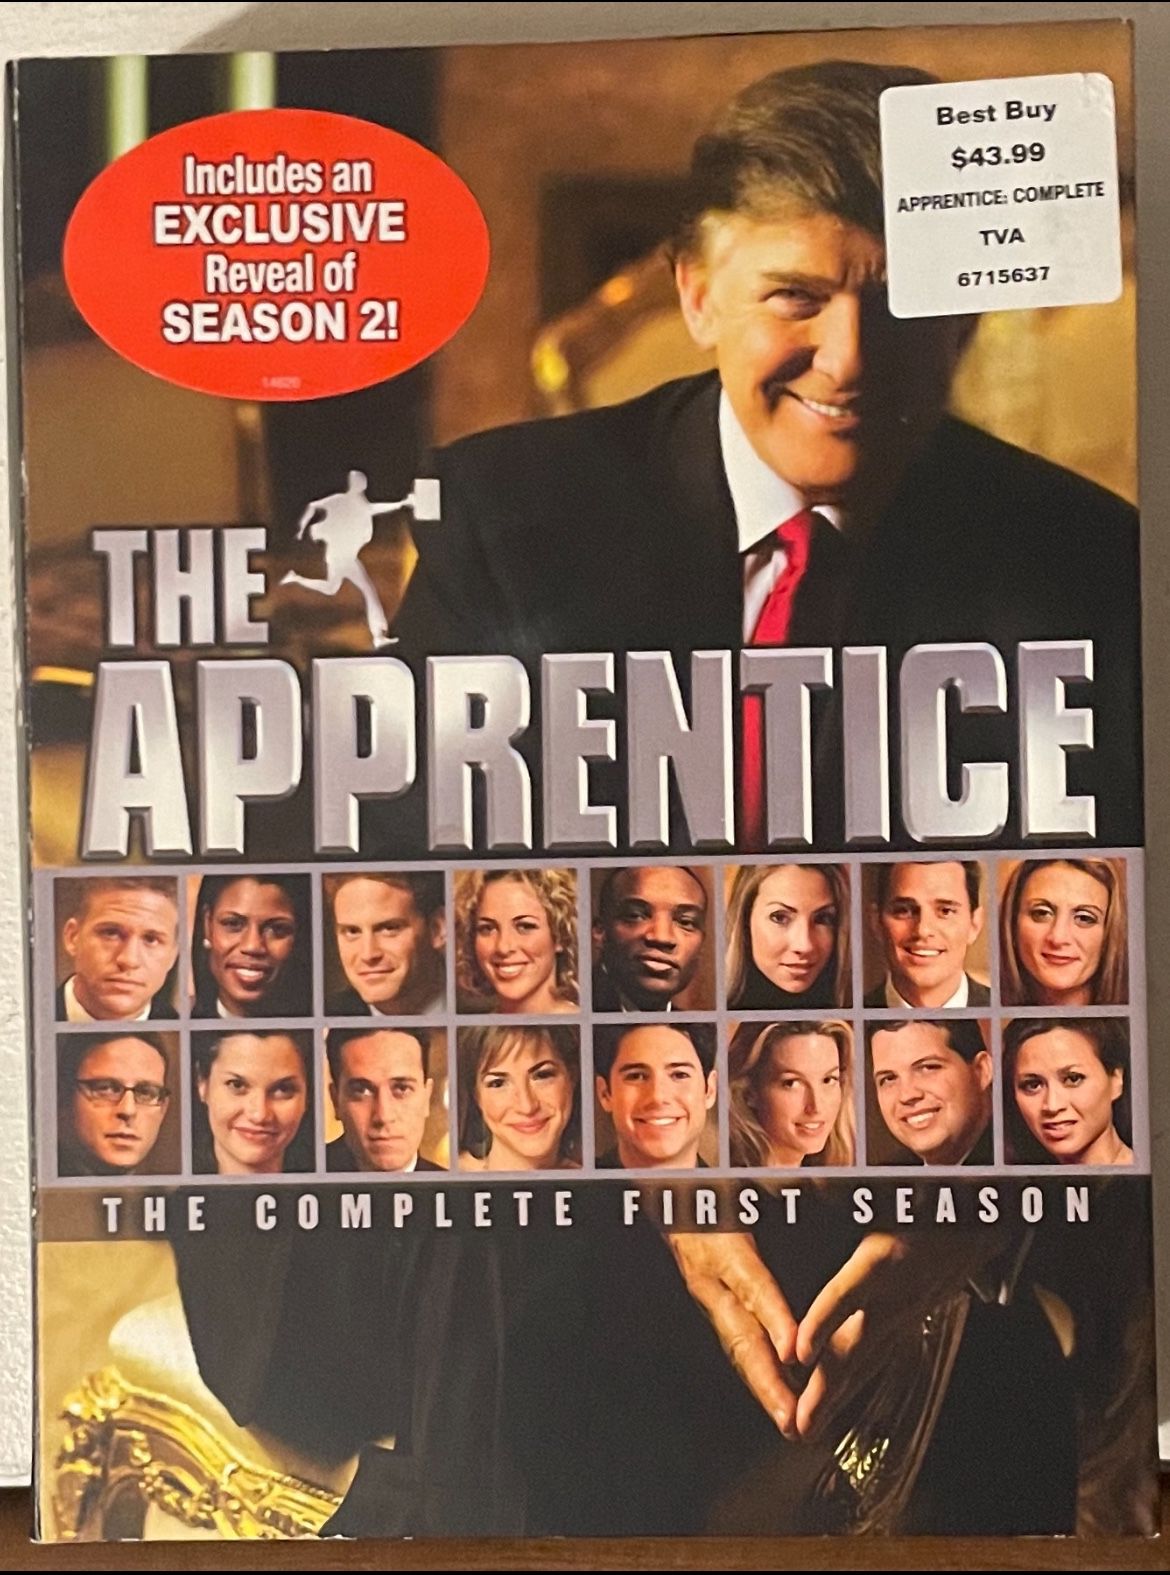 “The Apprentice” The Complete First Season.